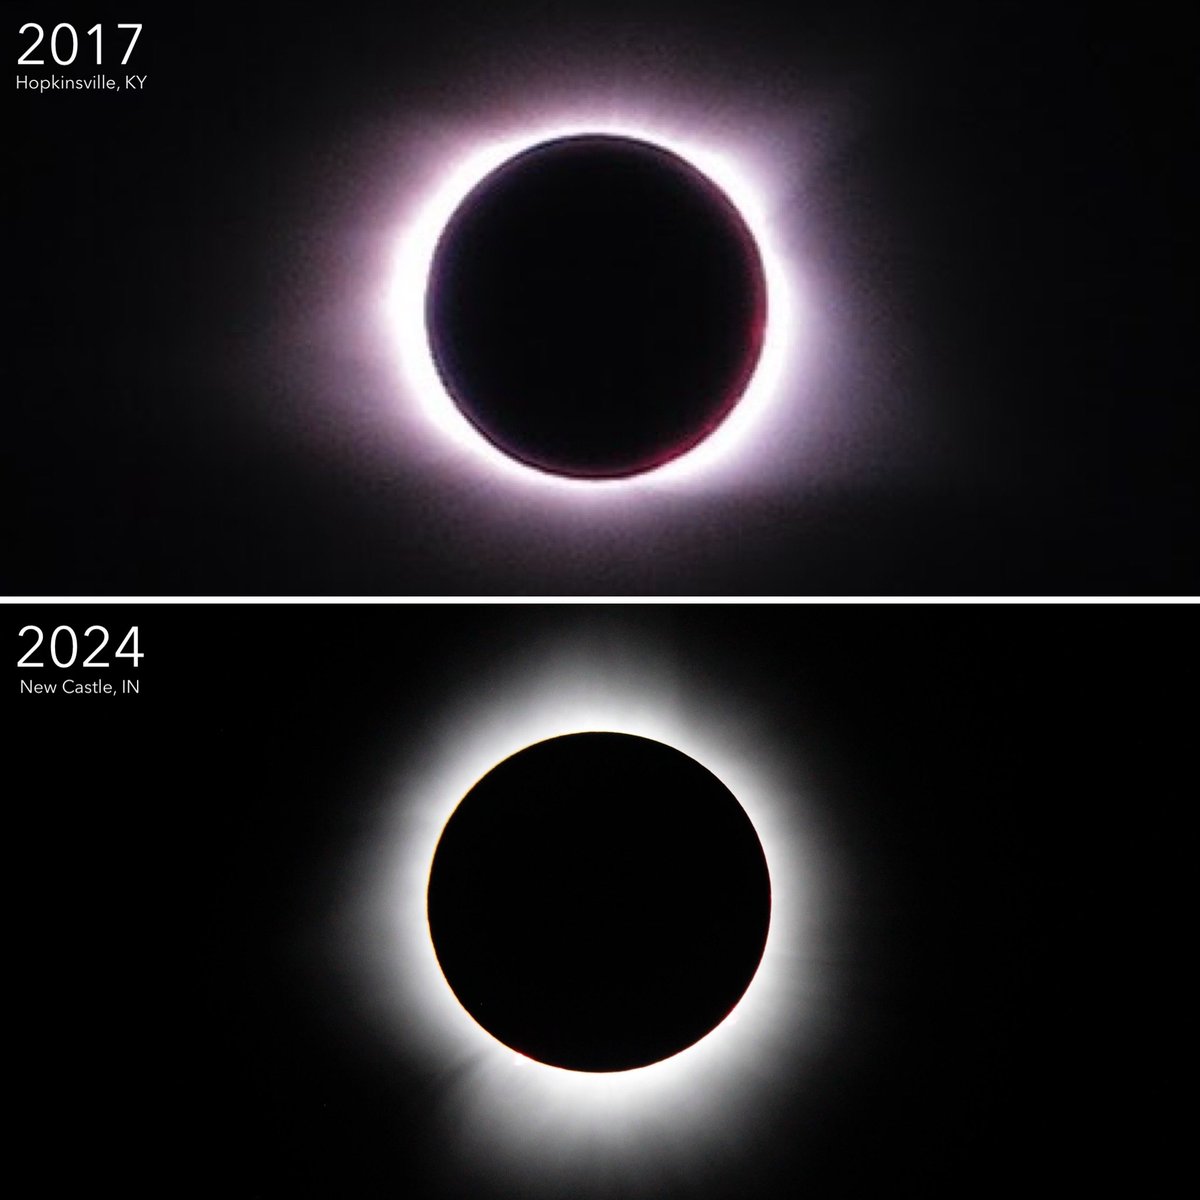 Comparing coronas!

Our image of 2017 pictured at top from Hopkinsville, KY. 2024 at bottom from New Castle, IN.
.
.
.
#eclipse #eclipse24 #eclipse2024 #totalsolareclipse #eclipseontap #getoutlookup #maketotalityareality #totality #celestialevent #spacephotography #astronomy